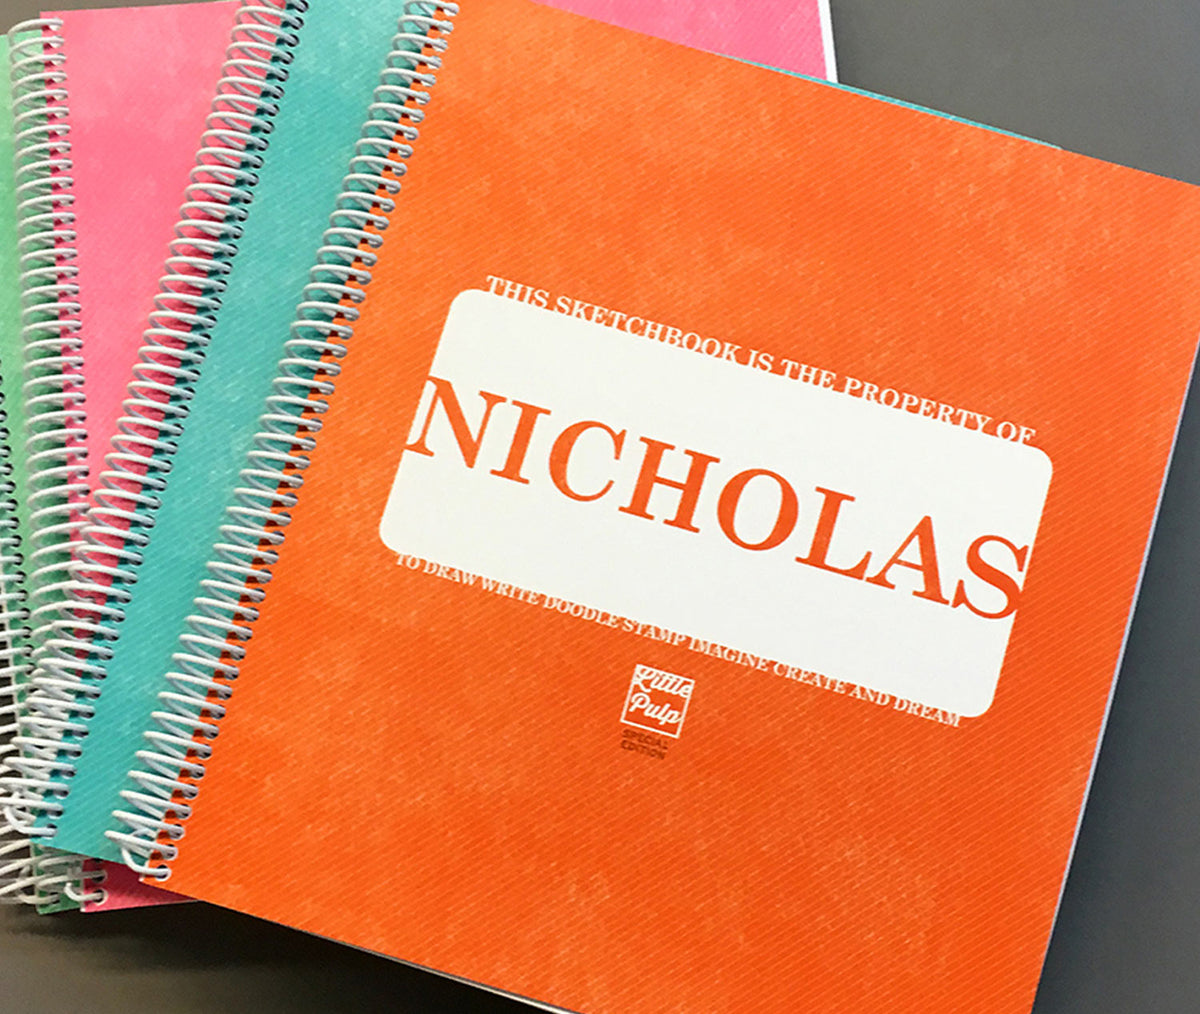  Personalized Sketchbook for Kids, Personalized